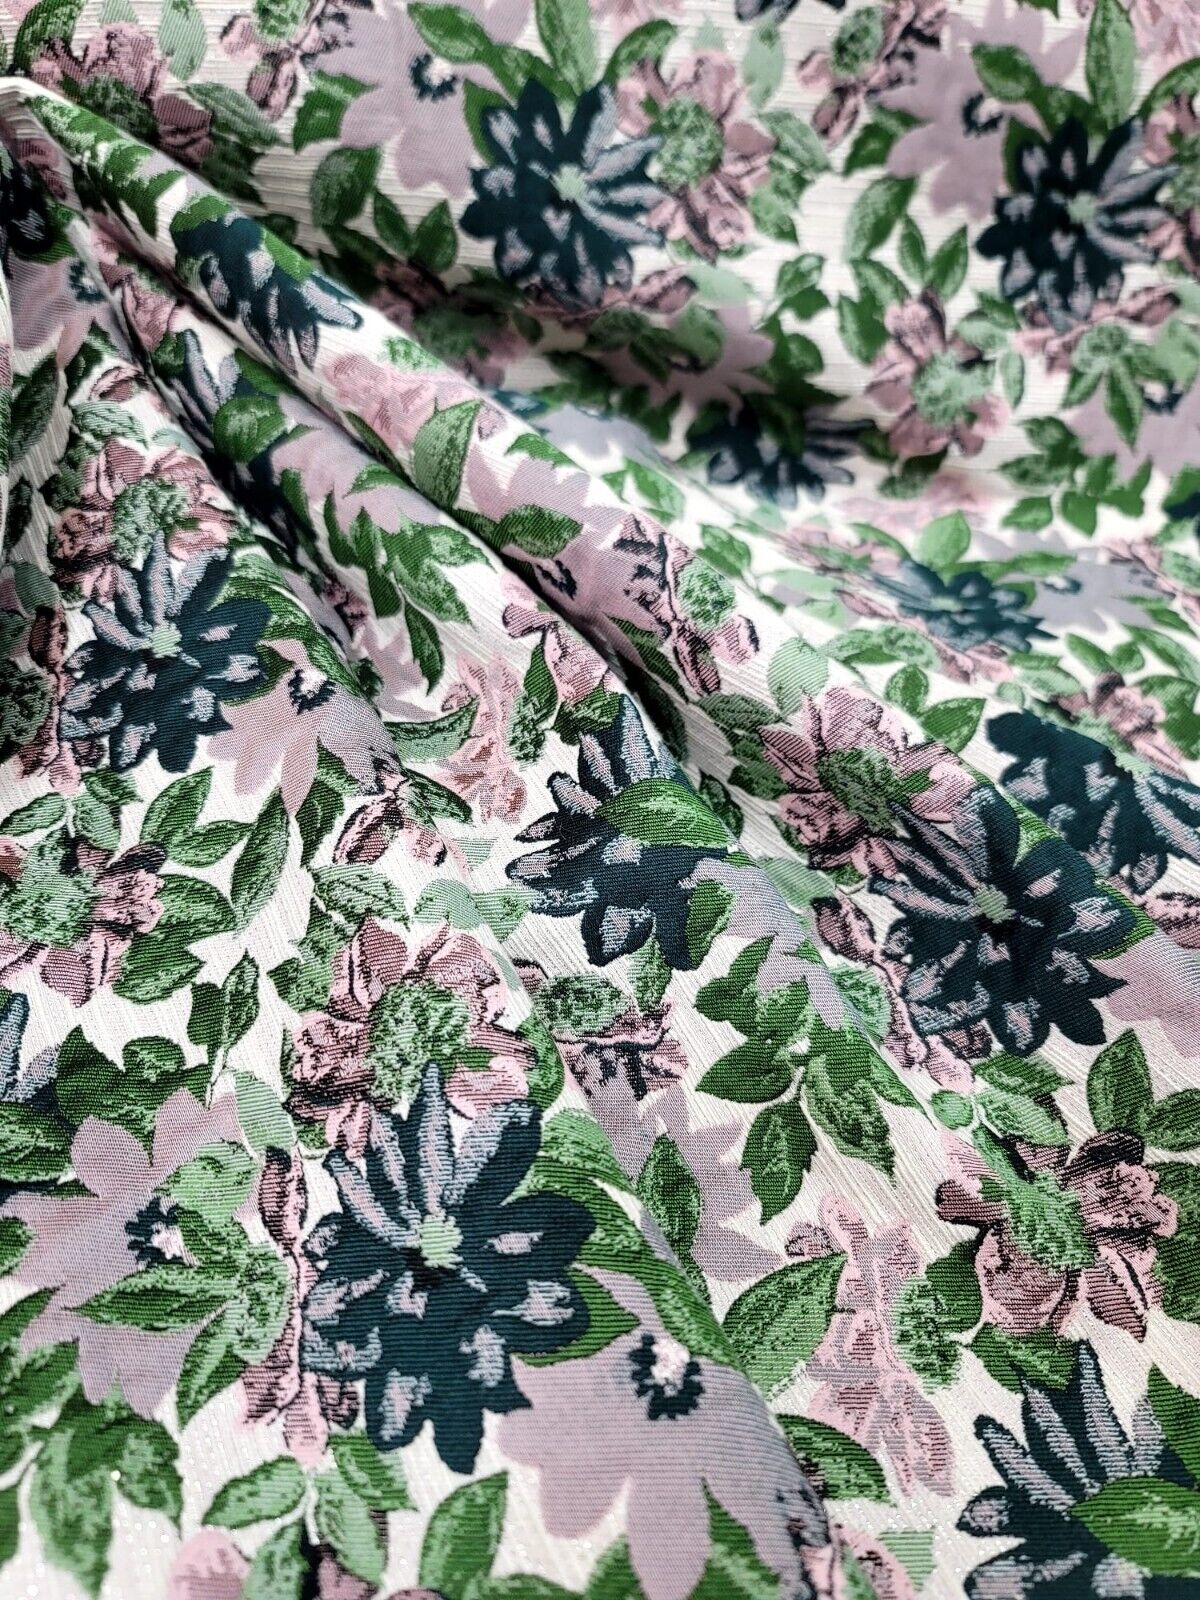 Mauve Green Floral Bridge Chenille Brocade Fabric - 60" Width - Sold by the Yard for Upholstery